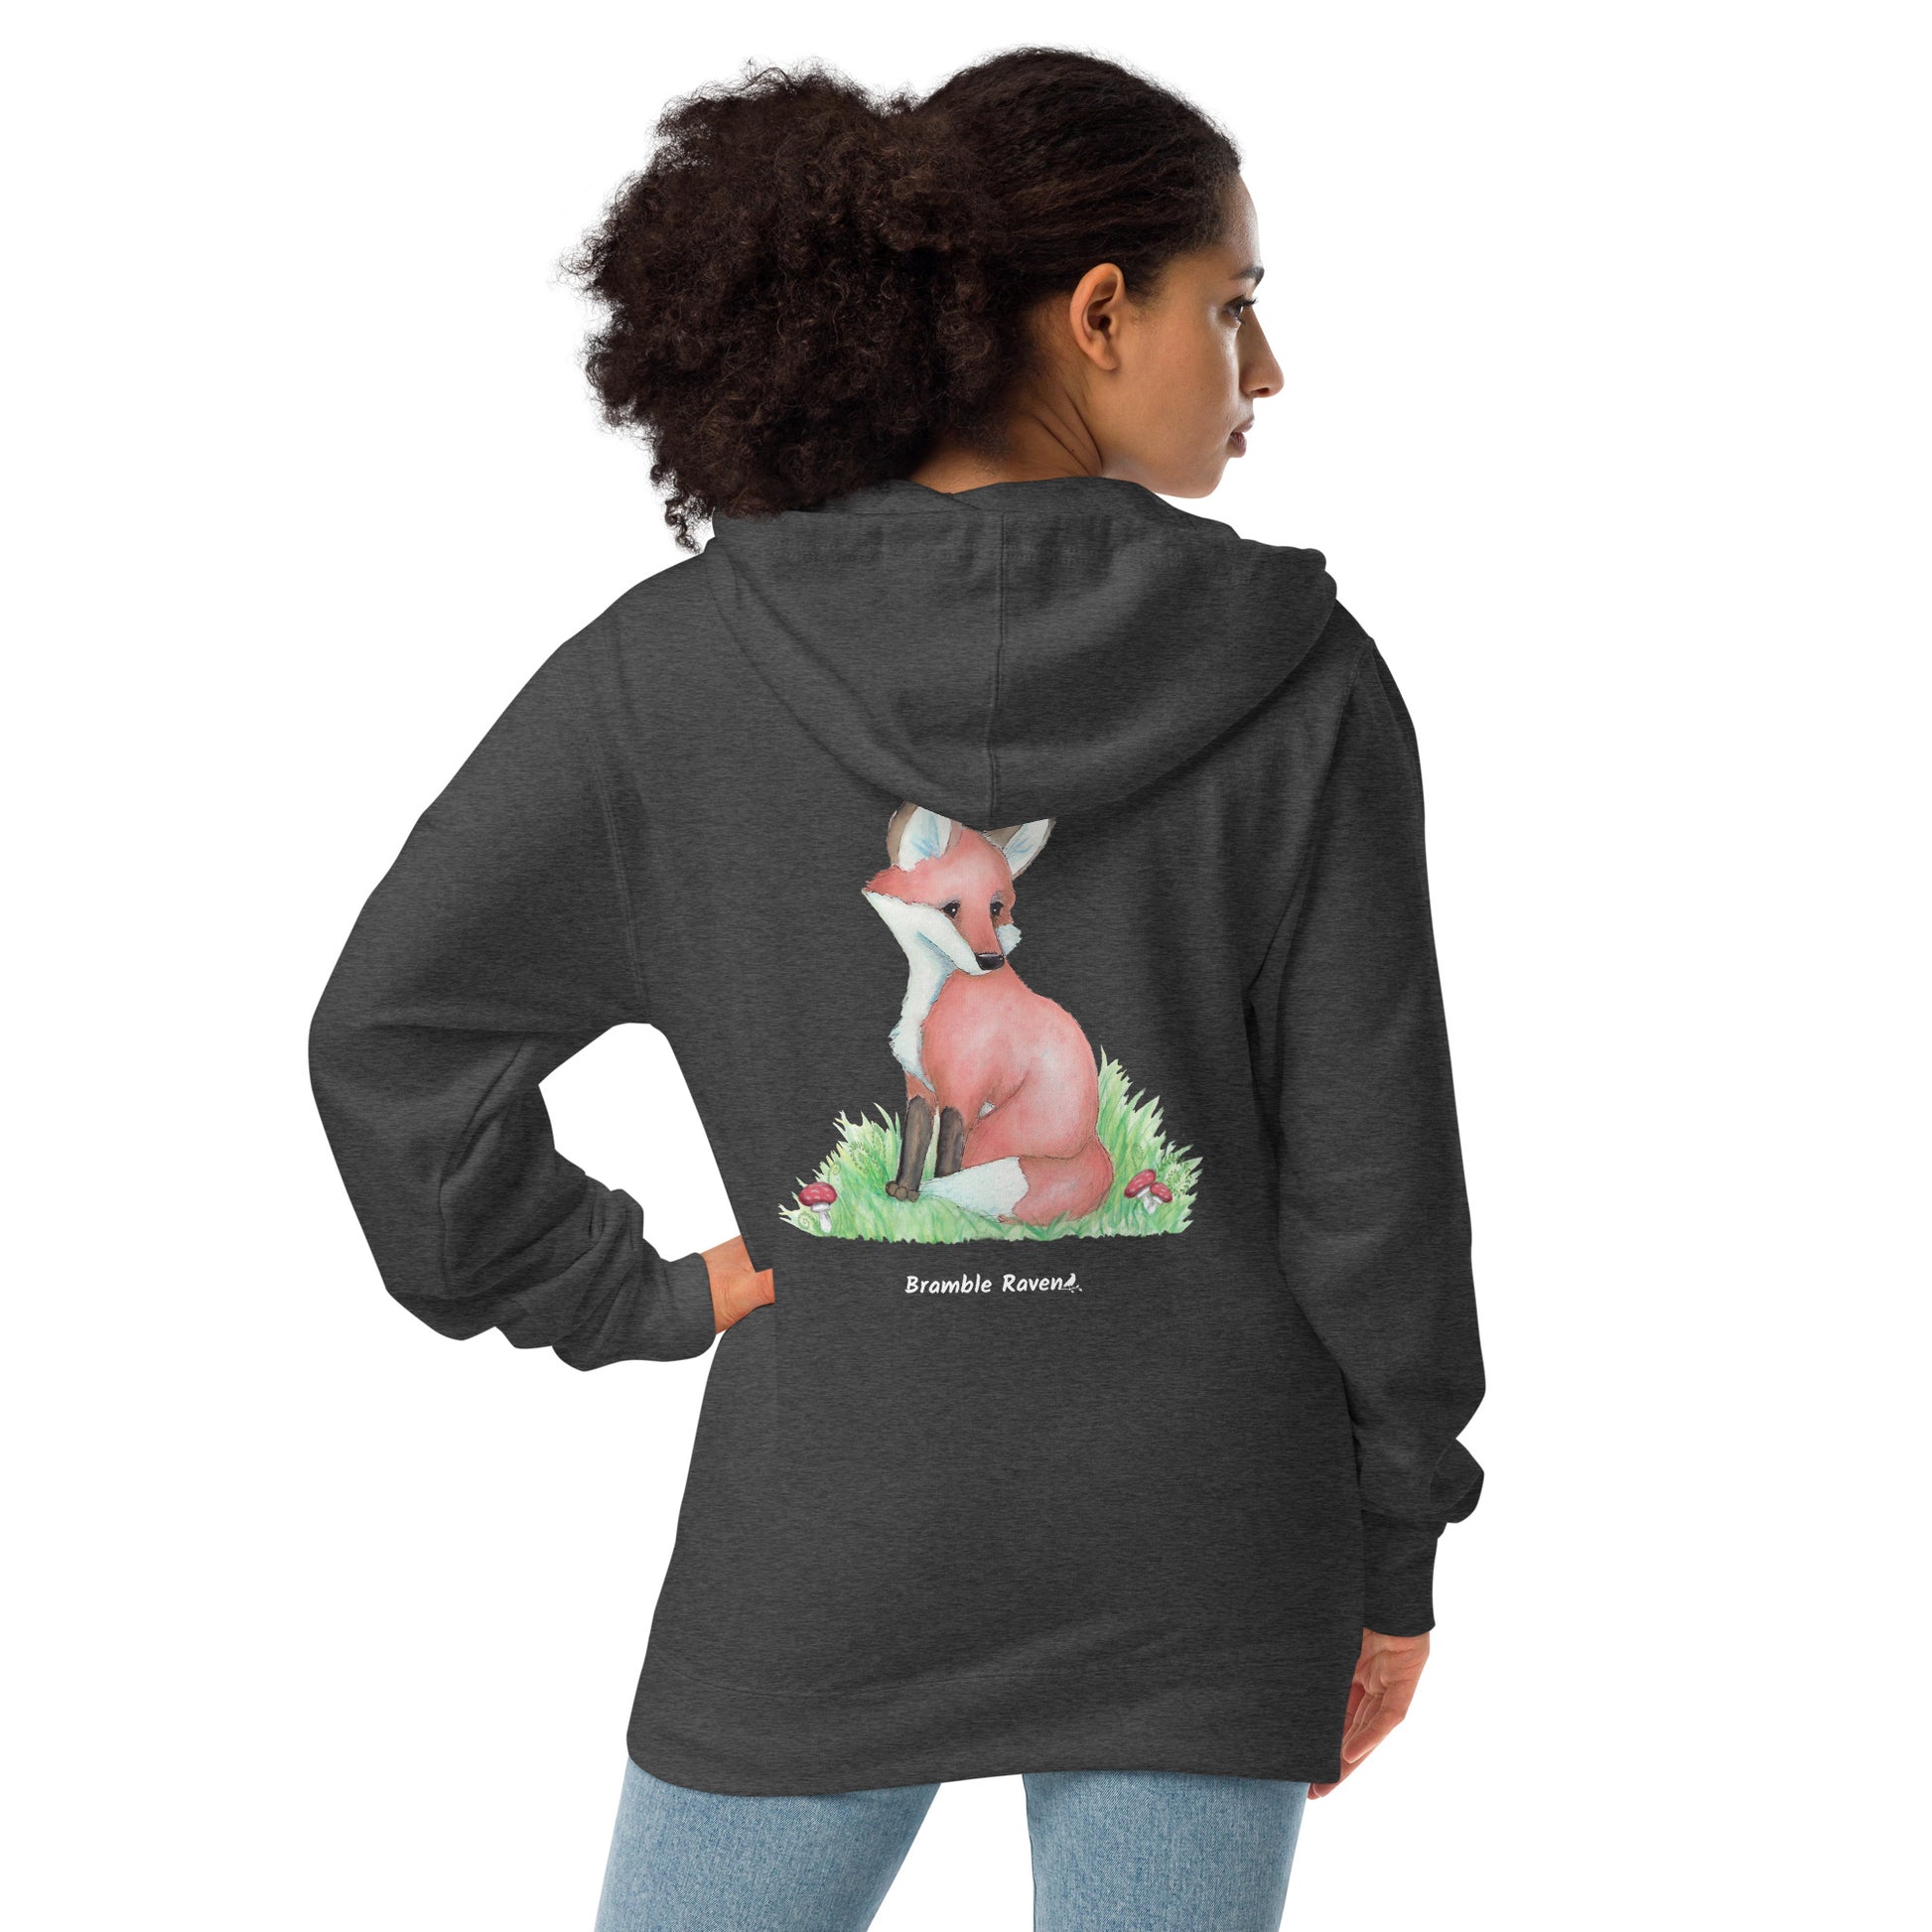 Charcoal heather grey unisex fleece zip up hoodie. Back design features a watercolor fox in the grass with ferns and mushrooms. Has a jersey-lined hood, metal eyelets and zipper. Back view shown on female model.